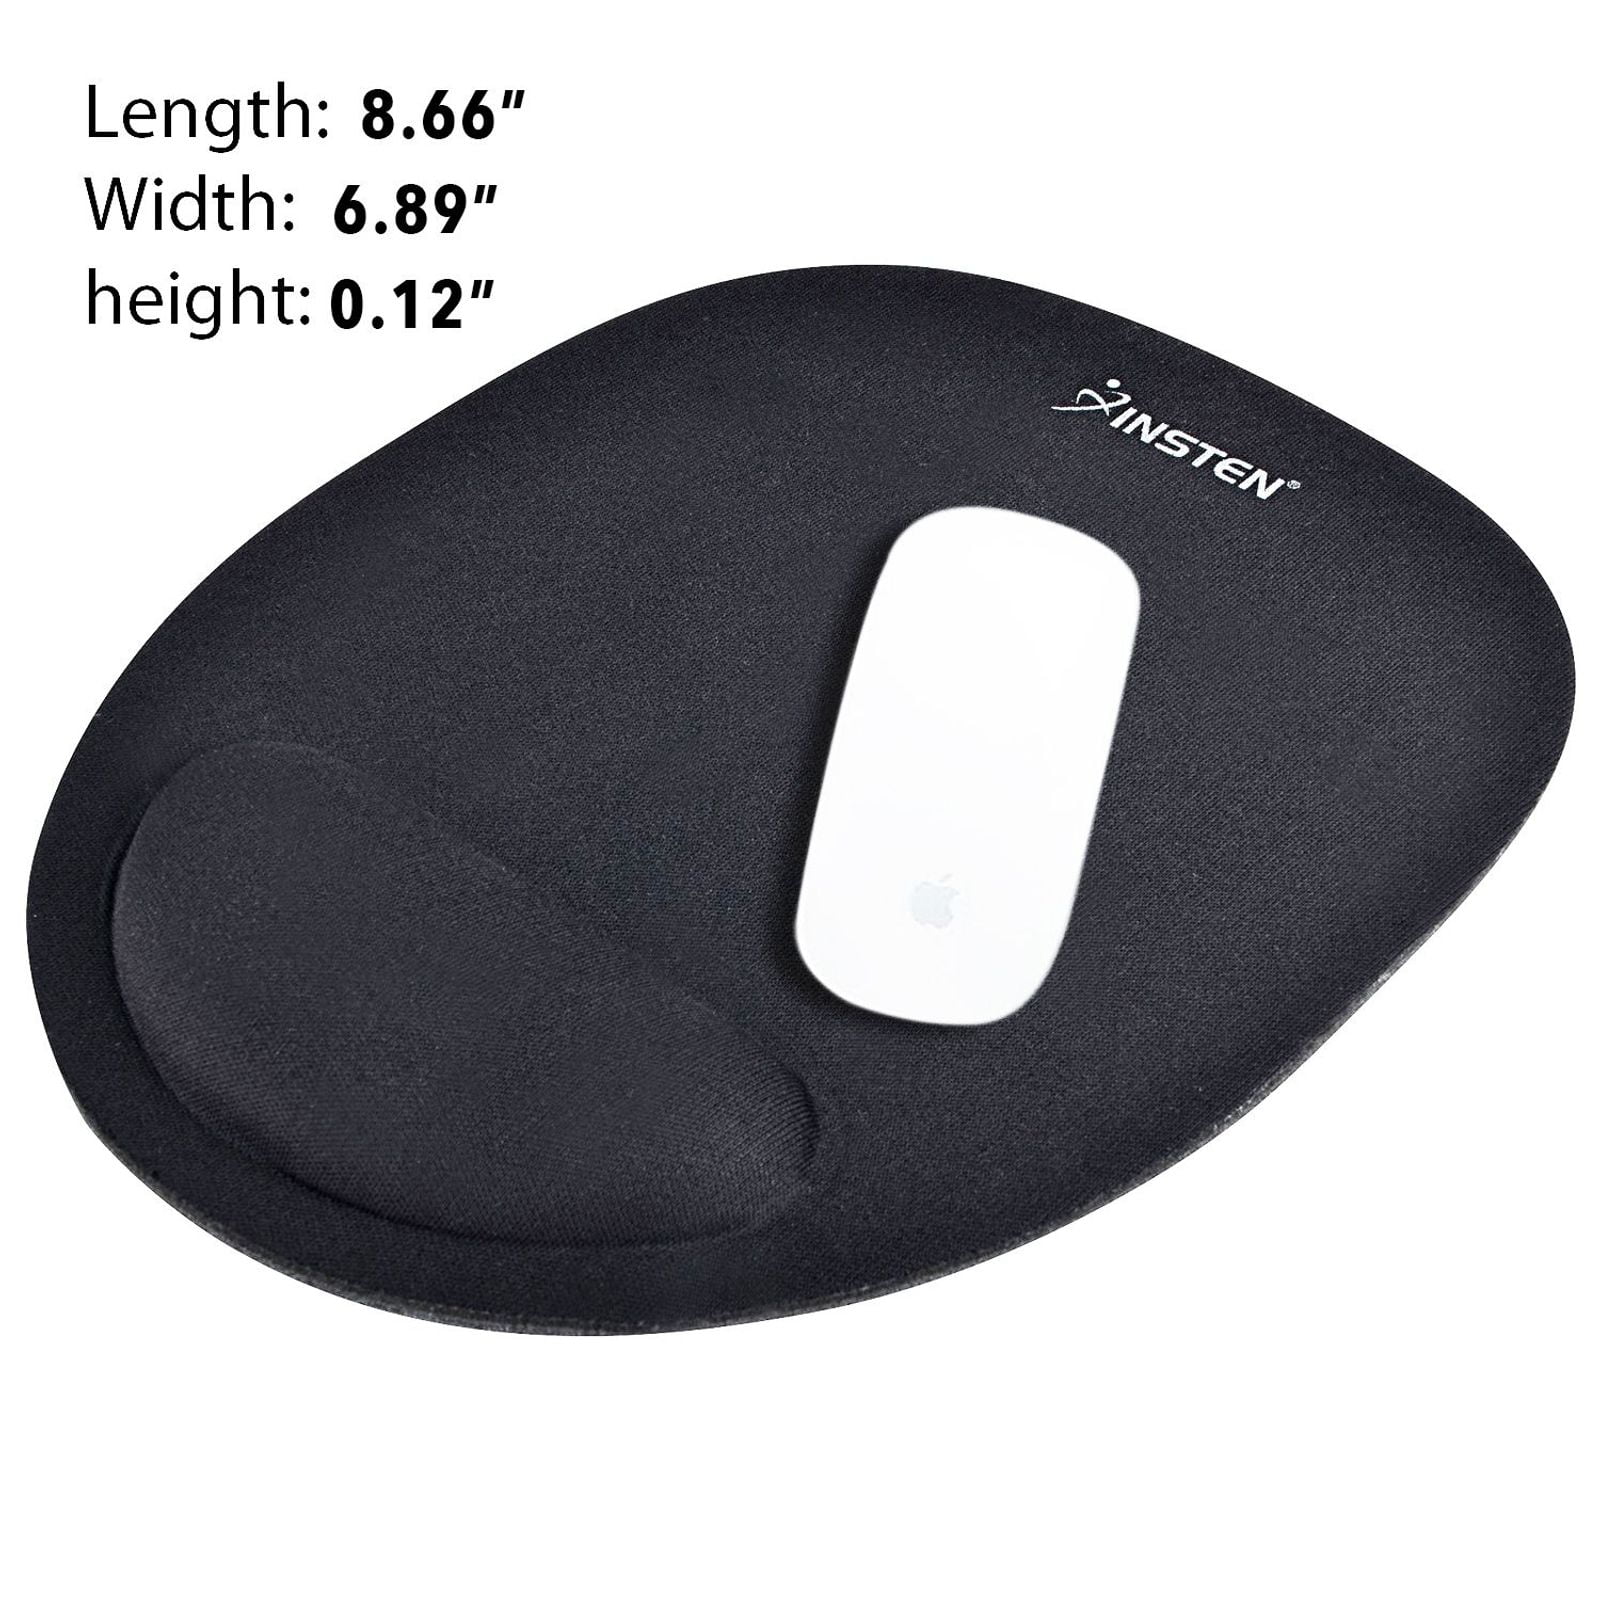 SURF Rx Computer Wrist Band Pad 2 Supports  for $5.99 